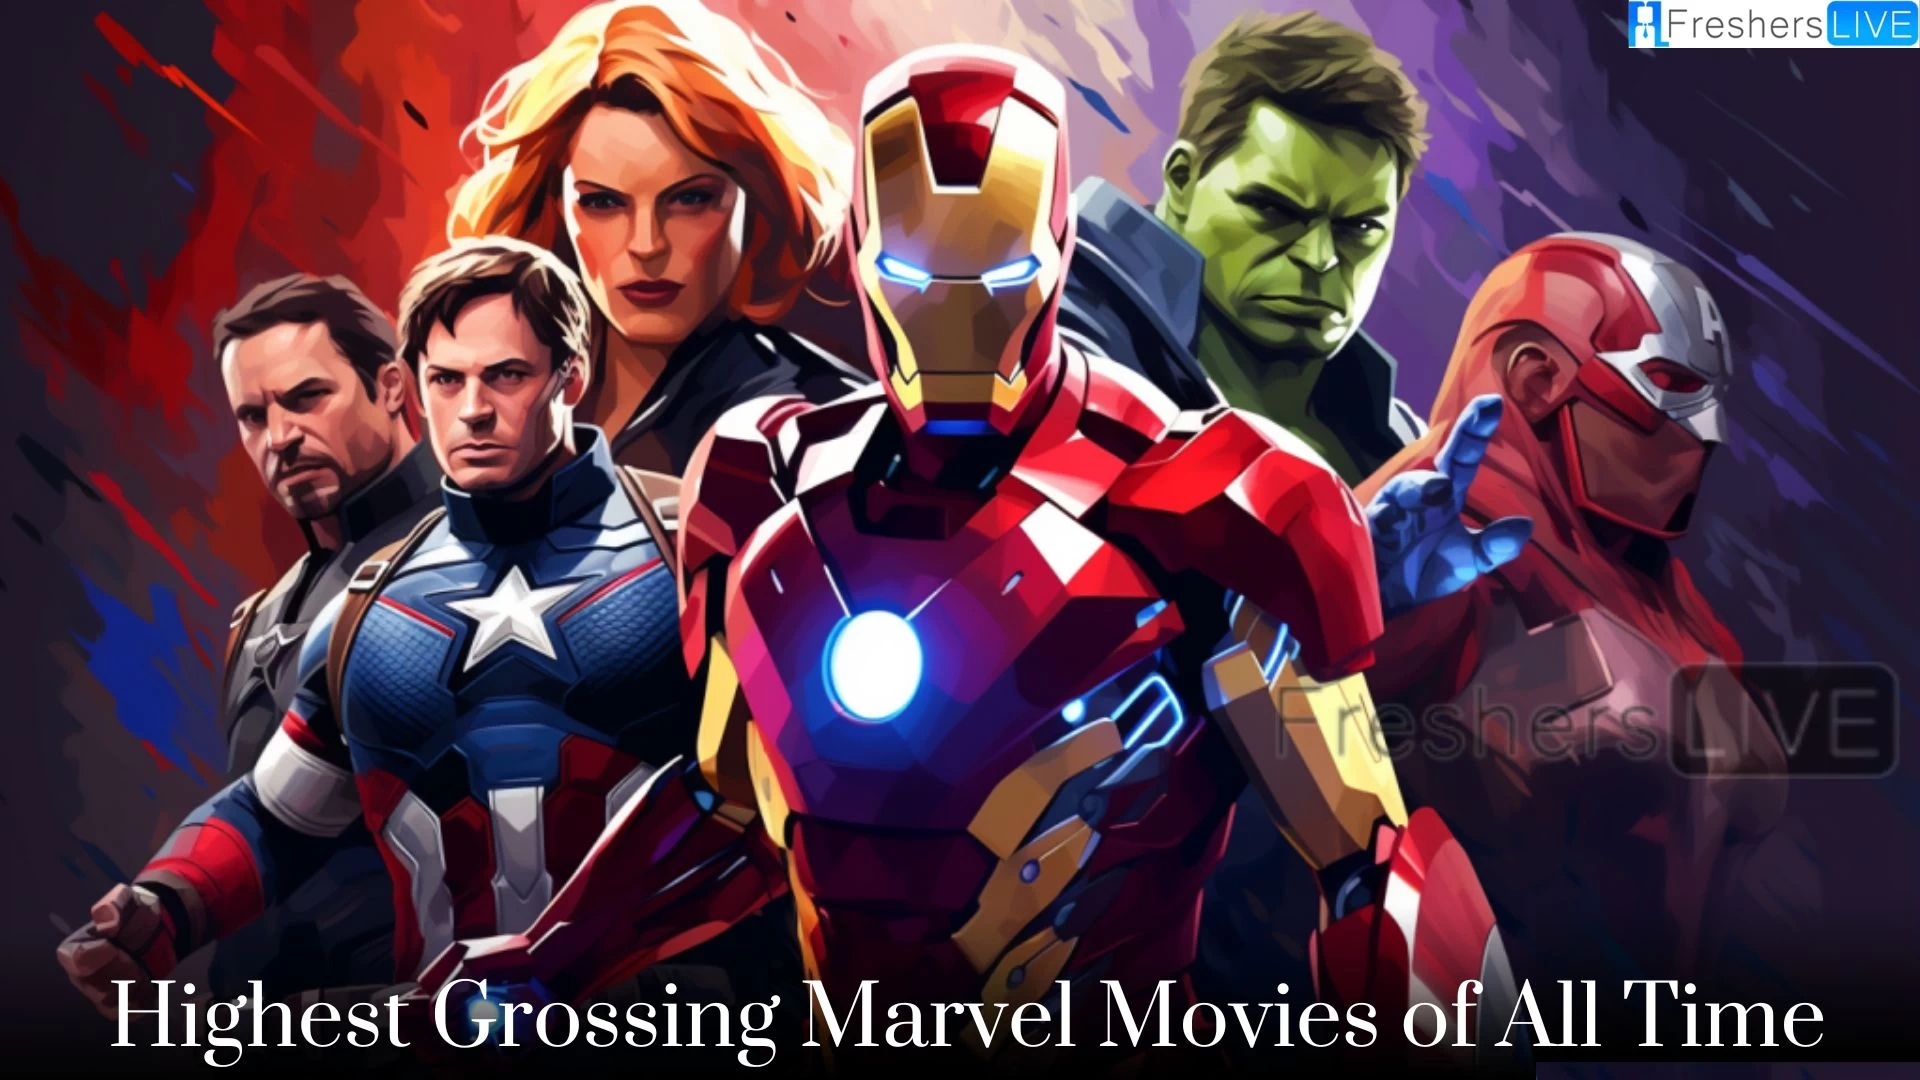 Highest Grossing Marvel Movies of All Time - Top 10 Iconic Movies in MCU